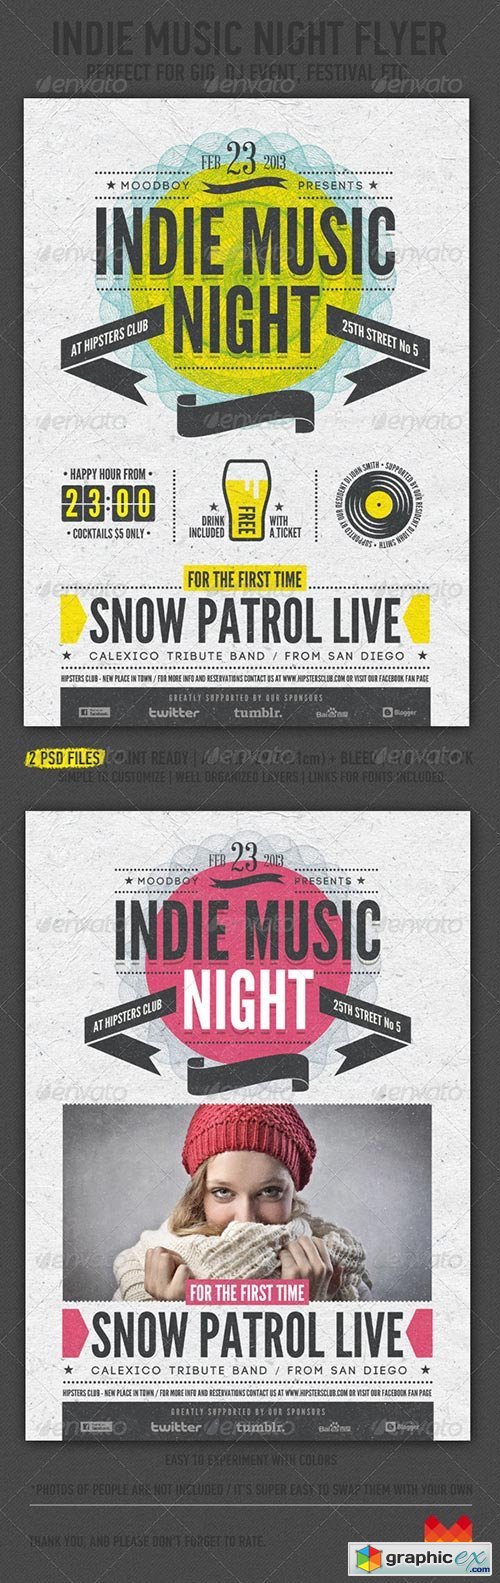 Indie Music Night Flyer / Poster